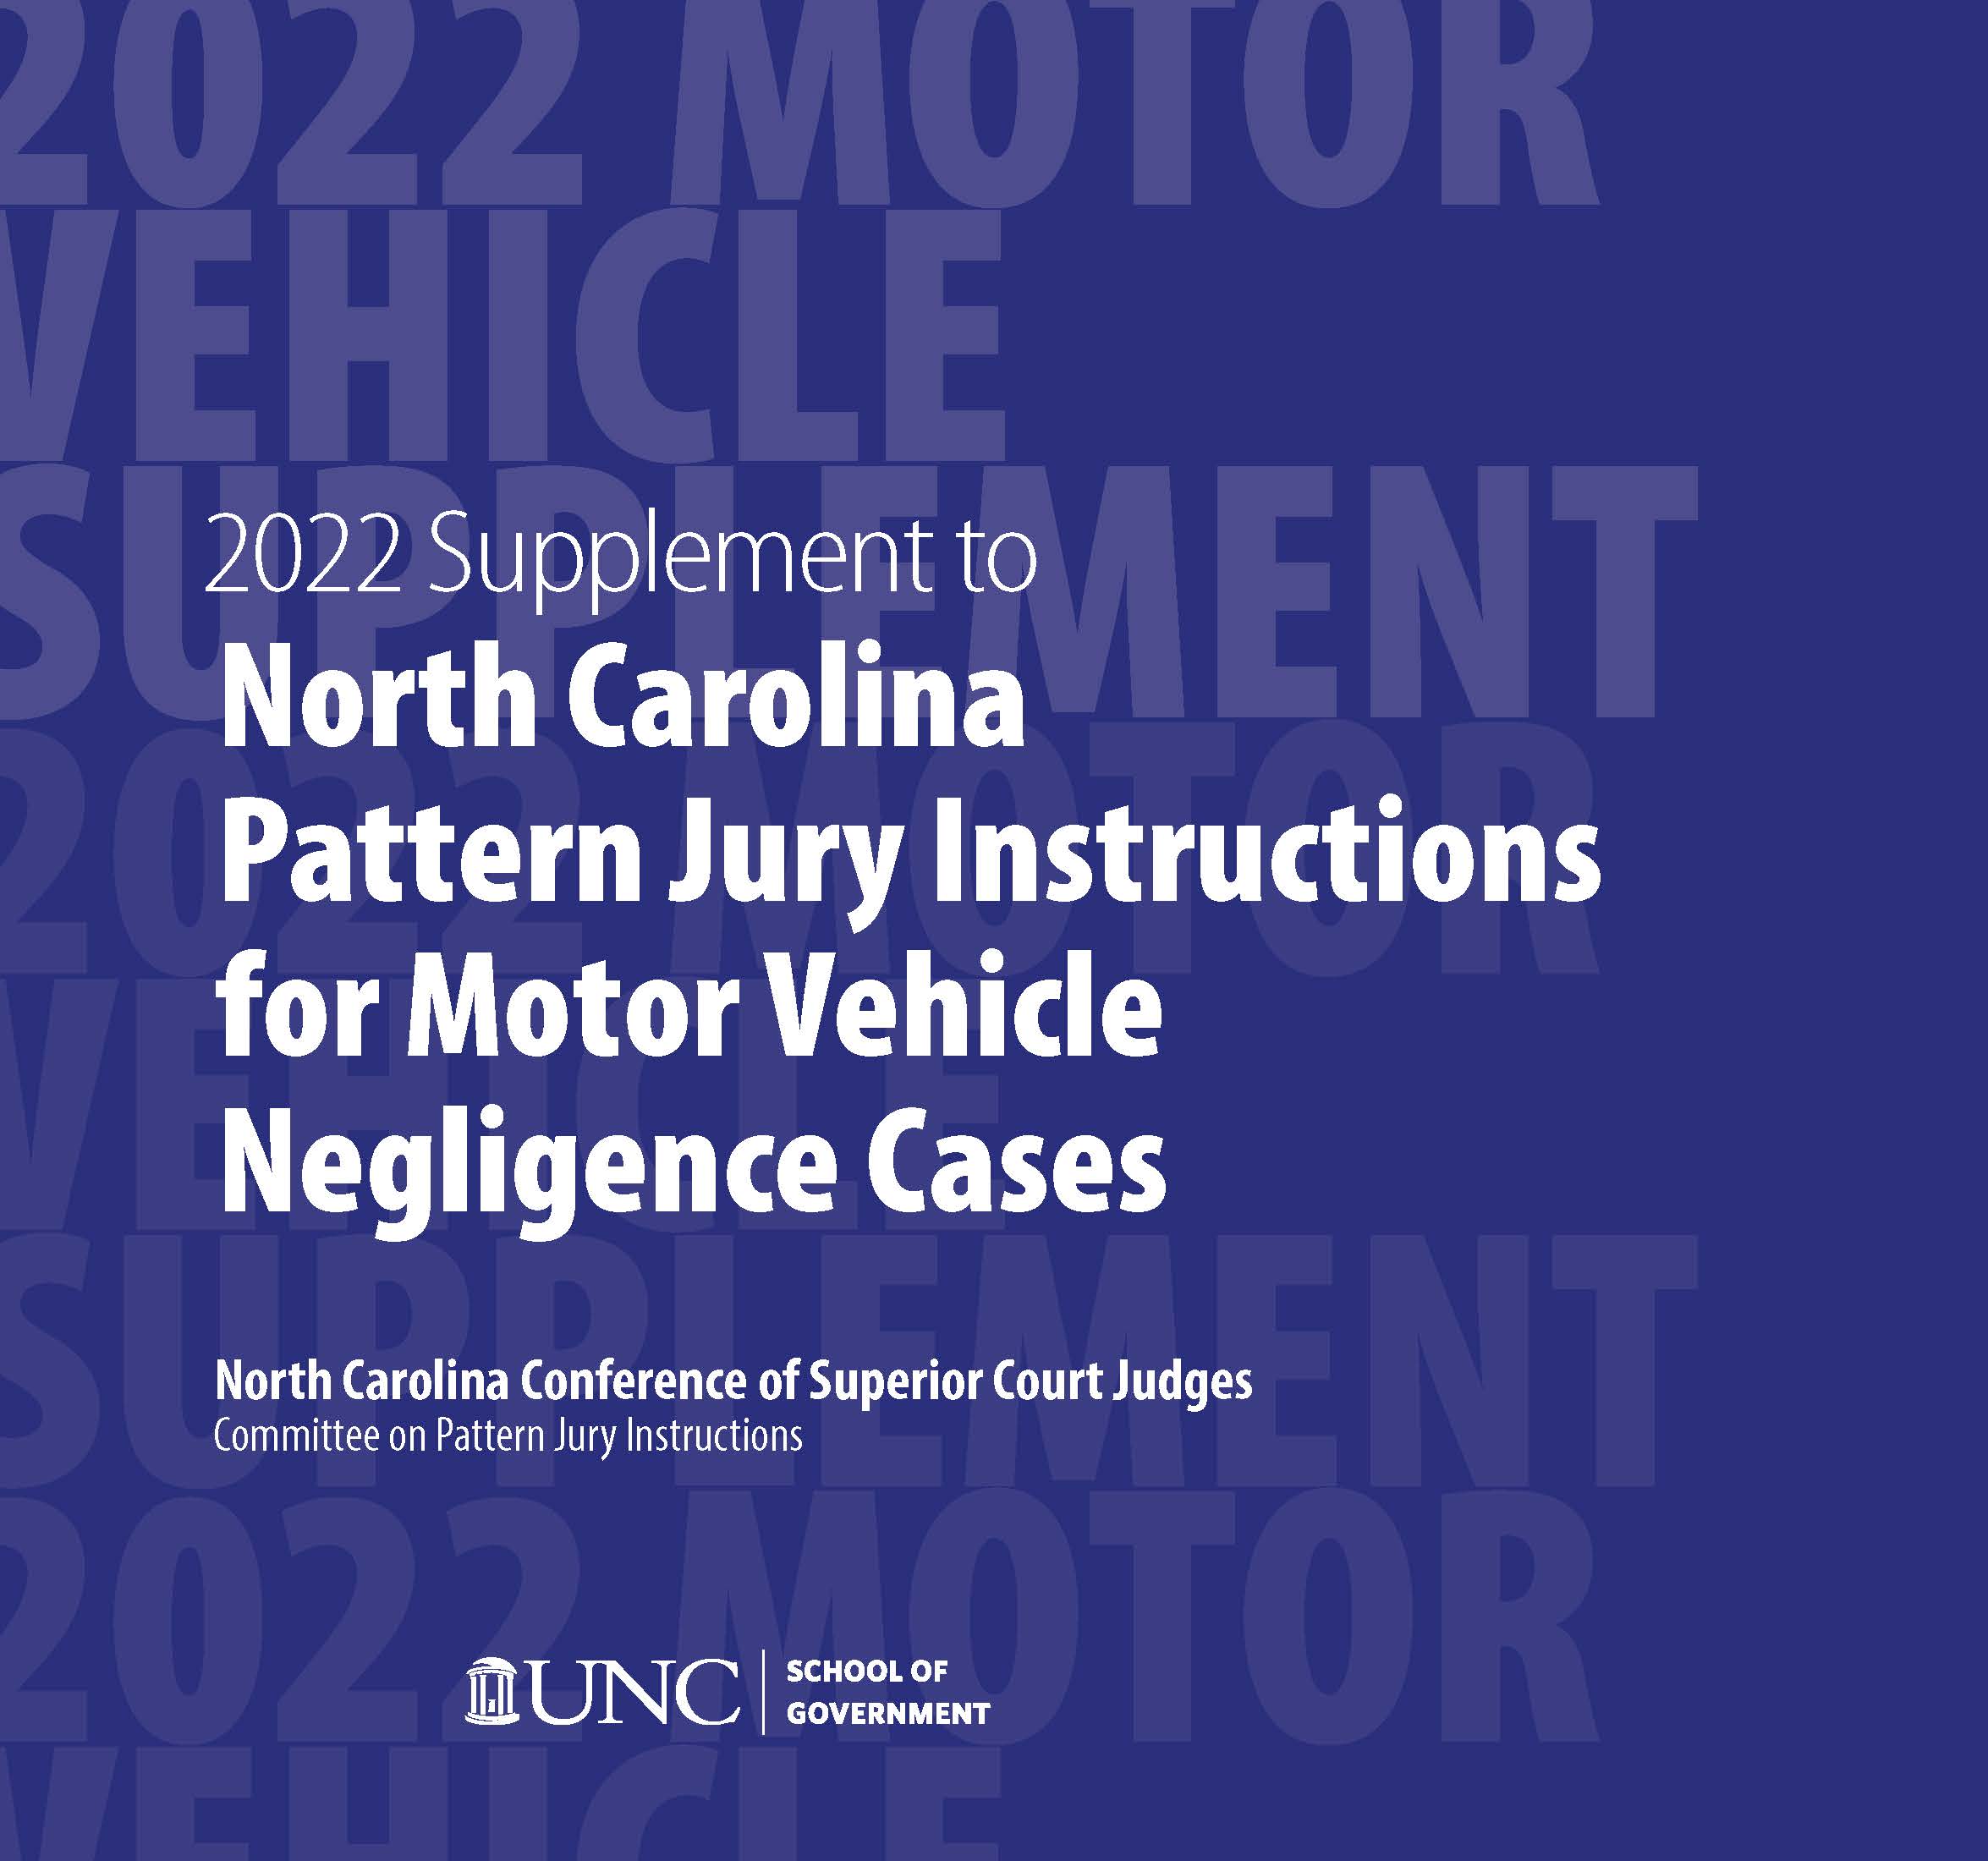 Cover image for June 2022 Supplement to North Carolina Pattern Jury Instructions for Motor Vehicle Negligence Cases